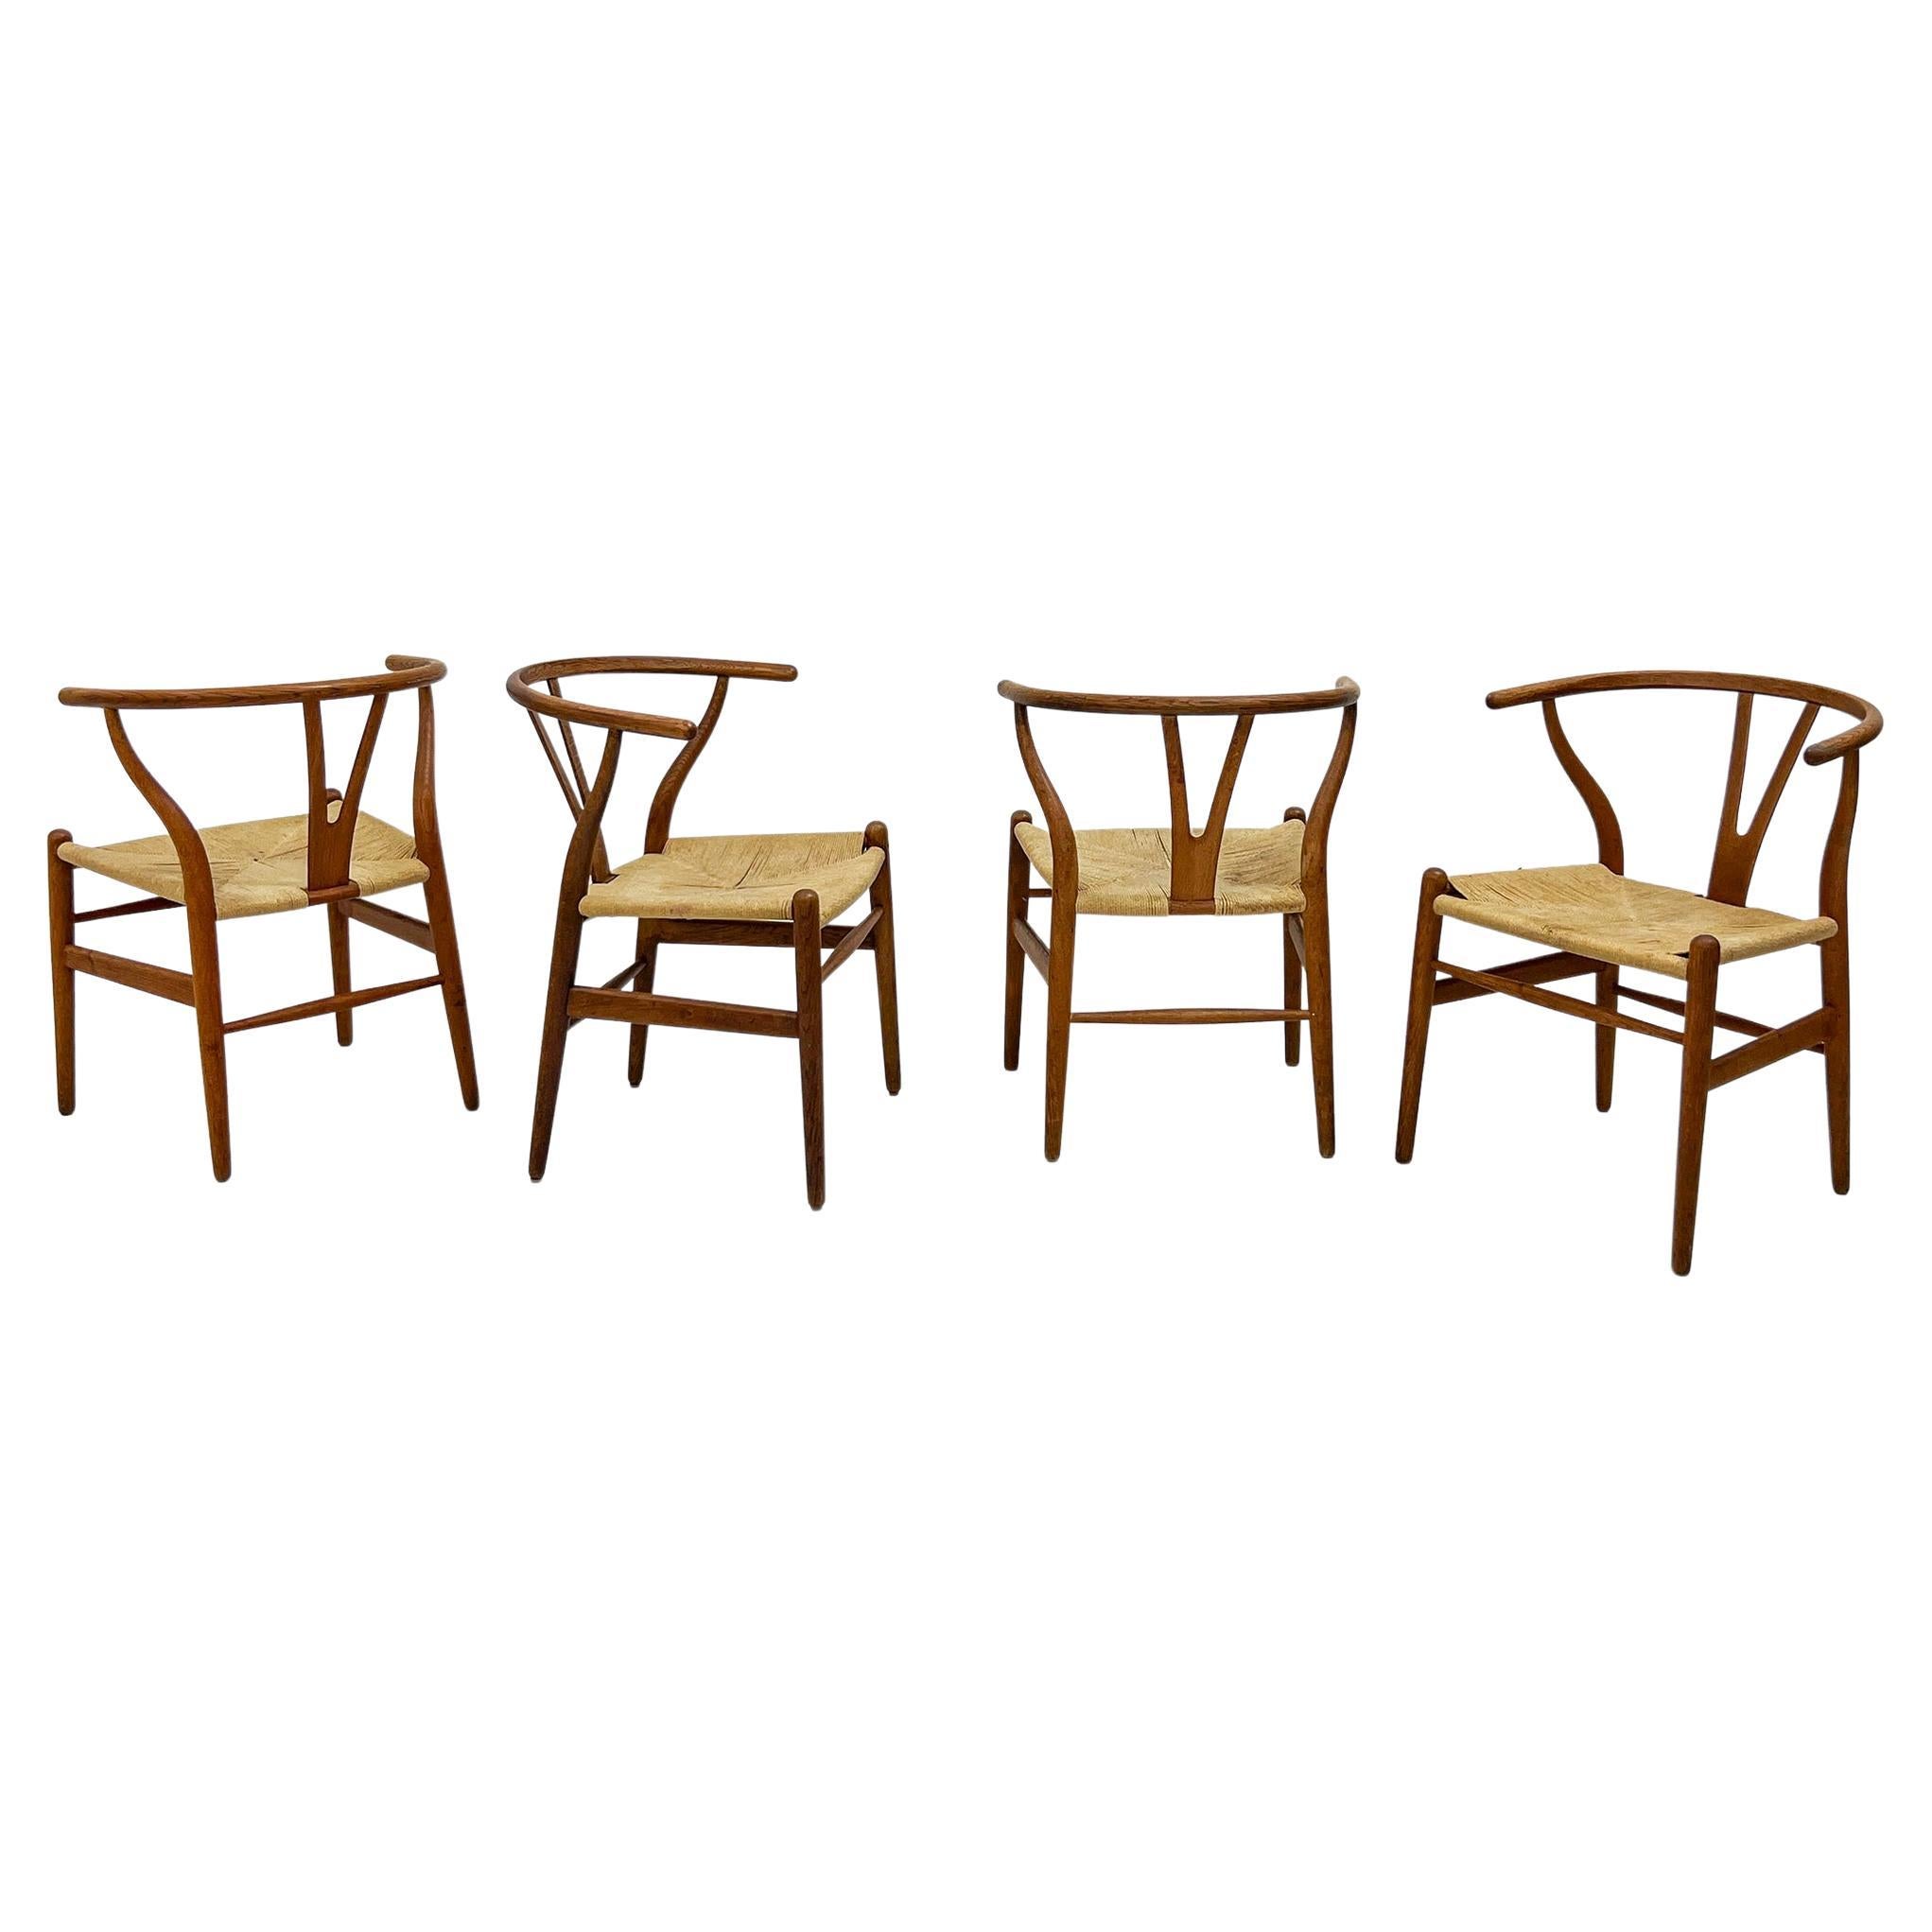 Set of 4 Vintage Patinated Hans Wegner CH24 Wishbone Dining Chairs in Oak